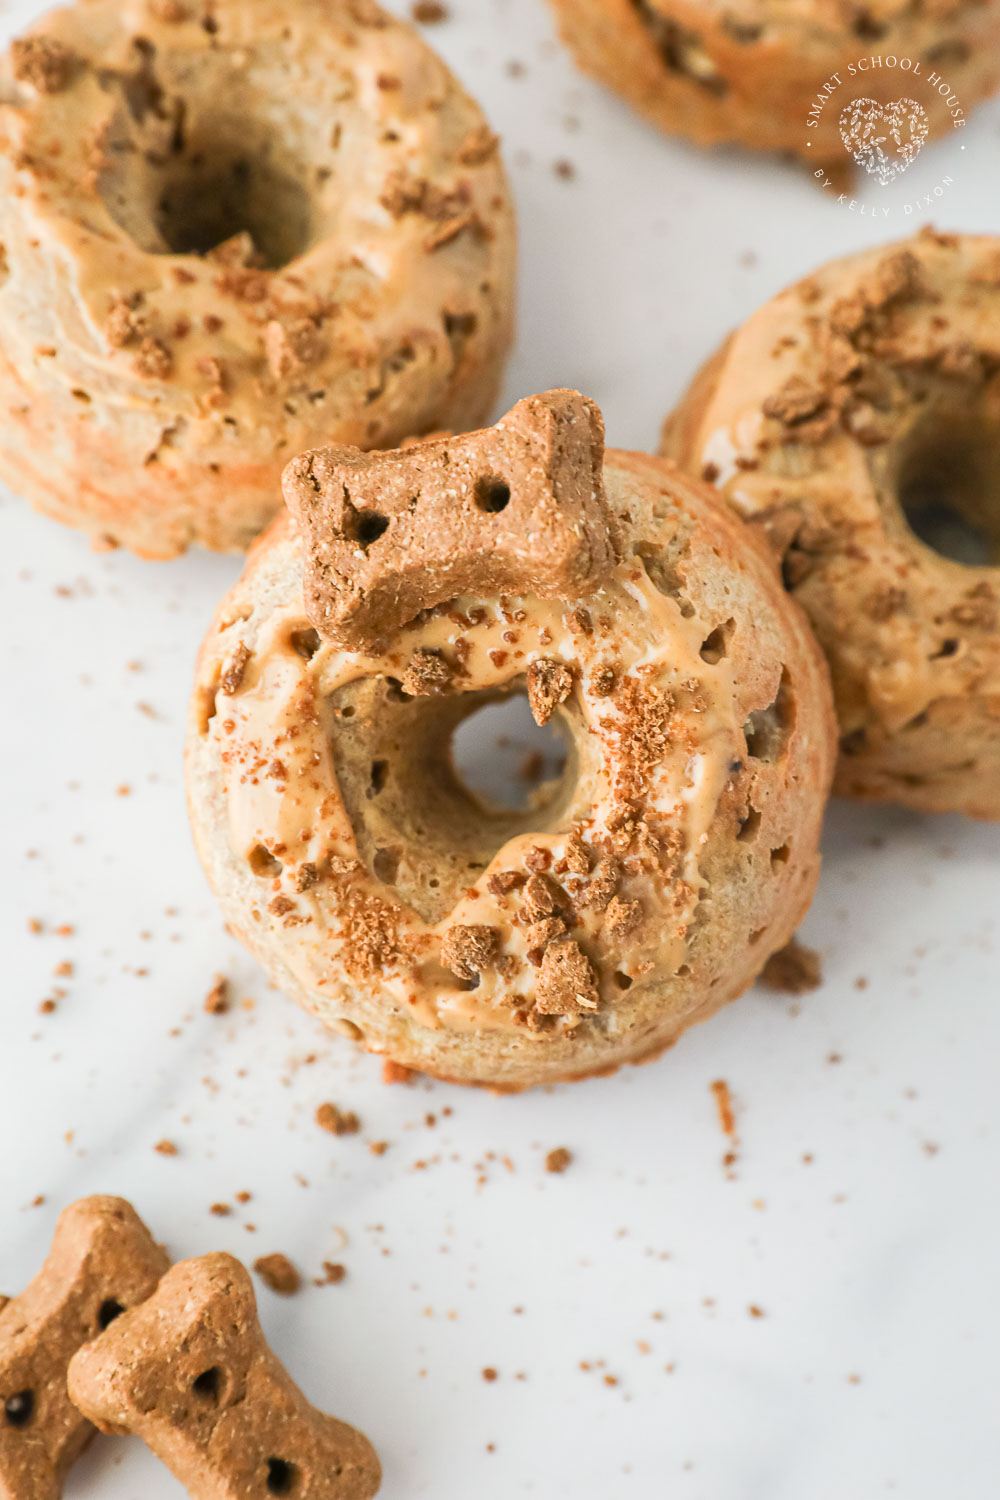 Just for your furry friend, these scrumptious Peanut Butter Dog Donuts are sure to make some tails wag with excitement!